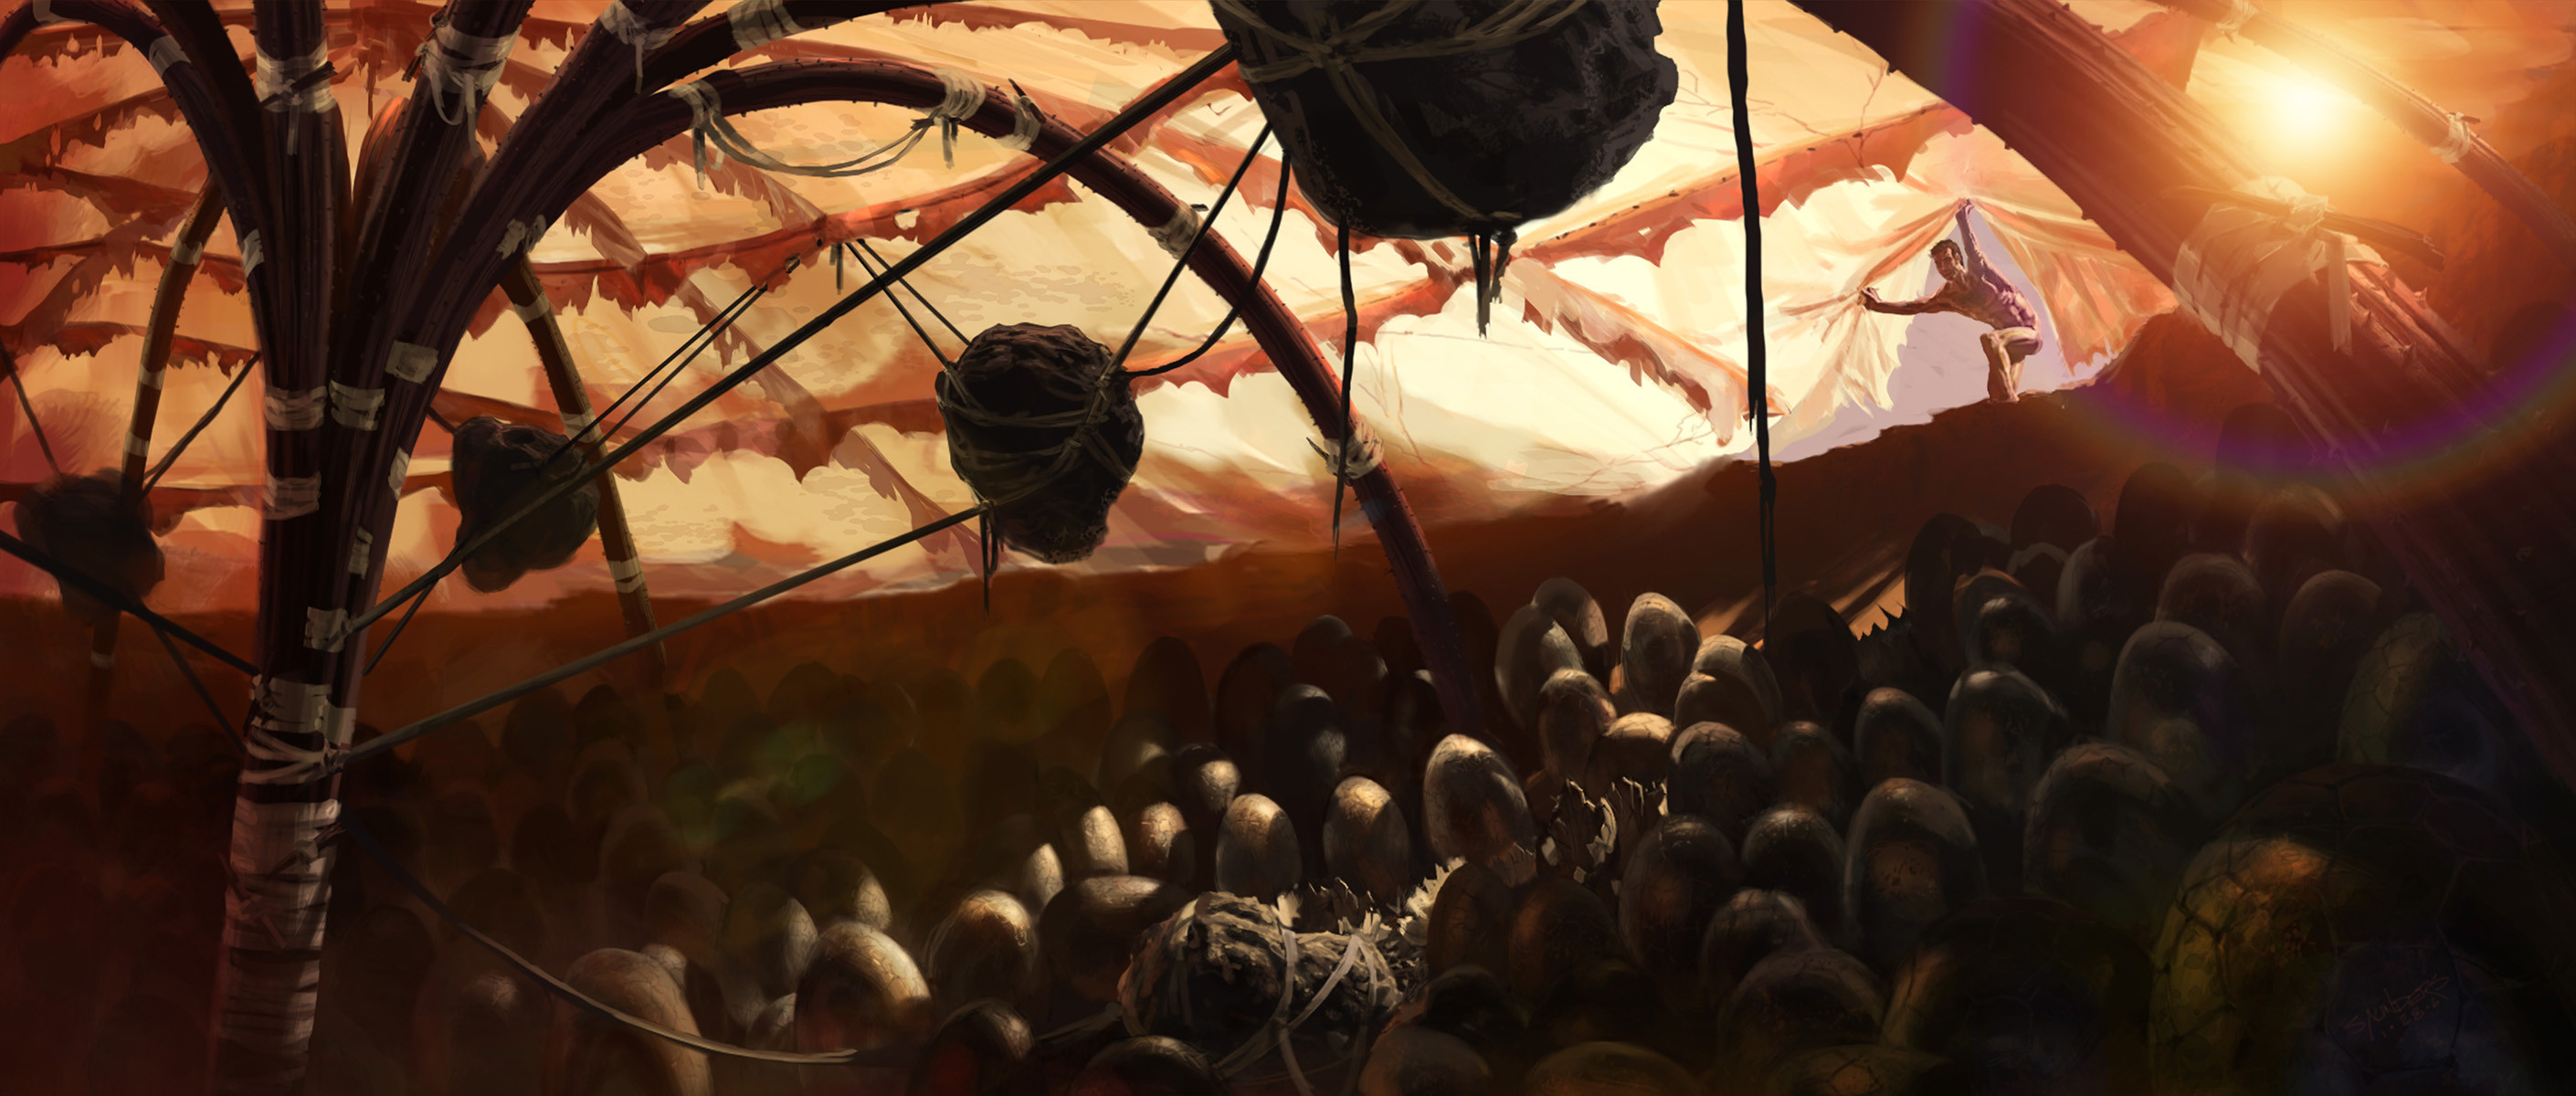 The final keyframe. I thought the translucency of the Thoat hides would lend the environment a warm Hothouse feel.